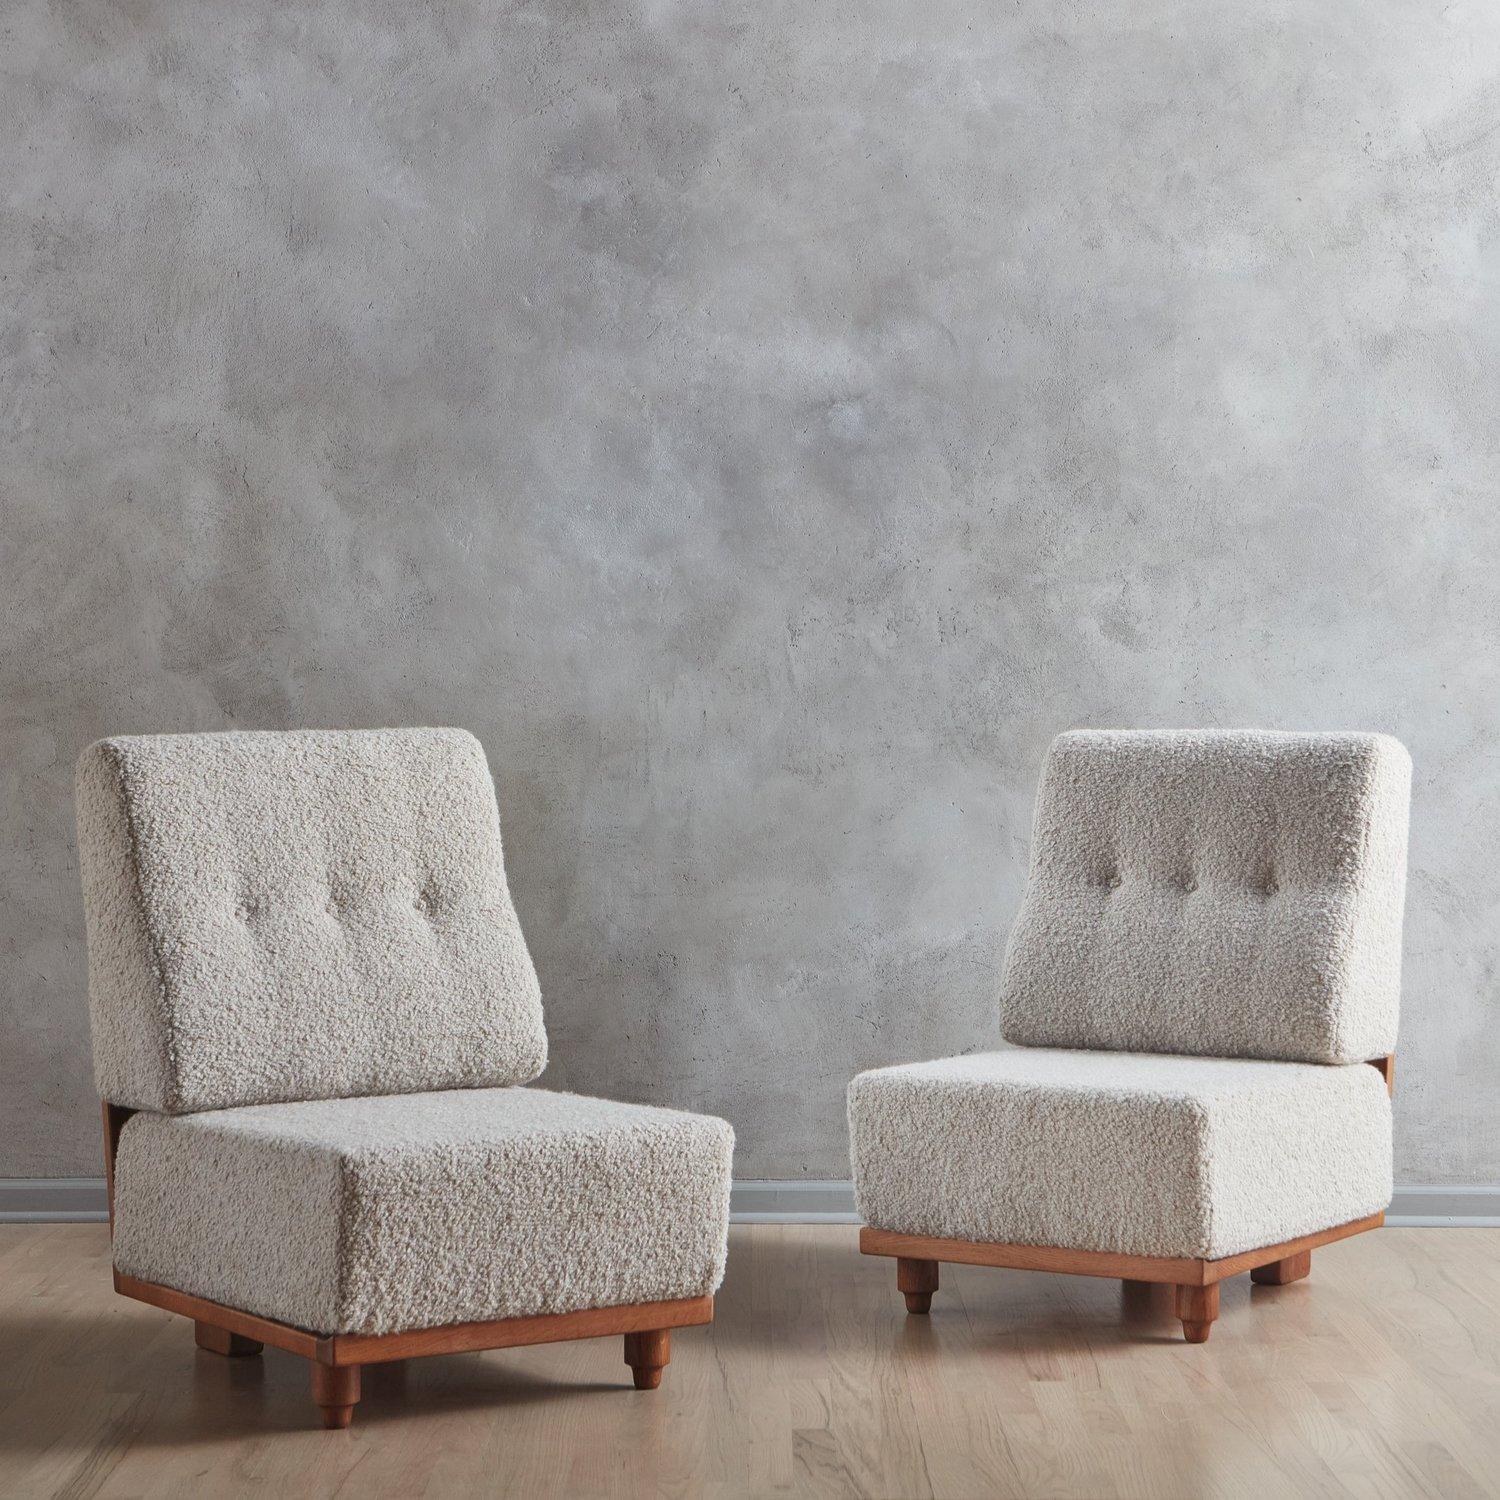 A pair of ‘Elmyre’ lounge chairs by Guillerme et Chambron. These chairs have sculptural oak frames with cutout details and sit low to the ground. They have thick removable cushions newly reupholstered in a beautiful Teddy Alpaca fabric with tuft